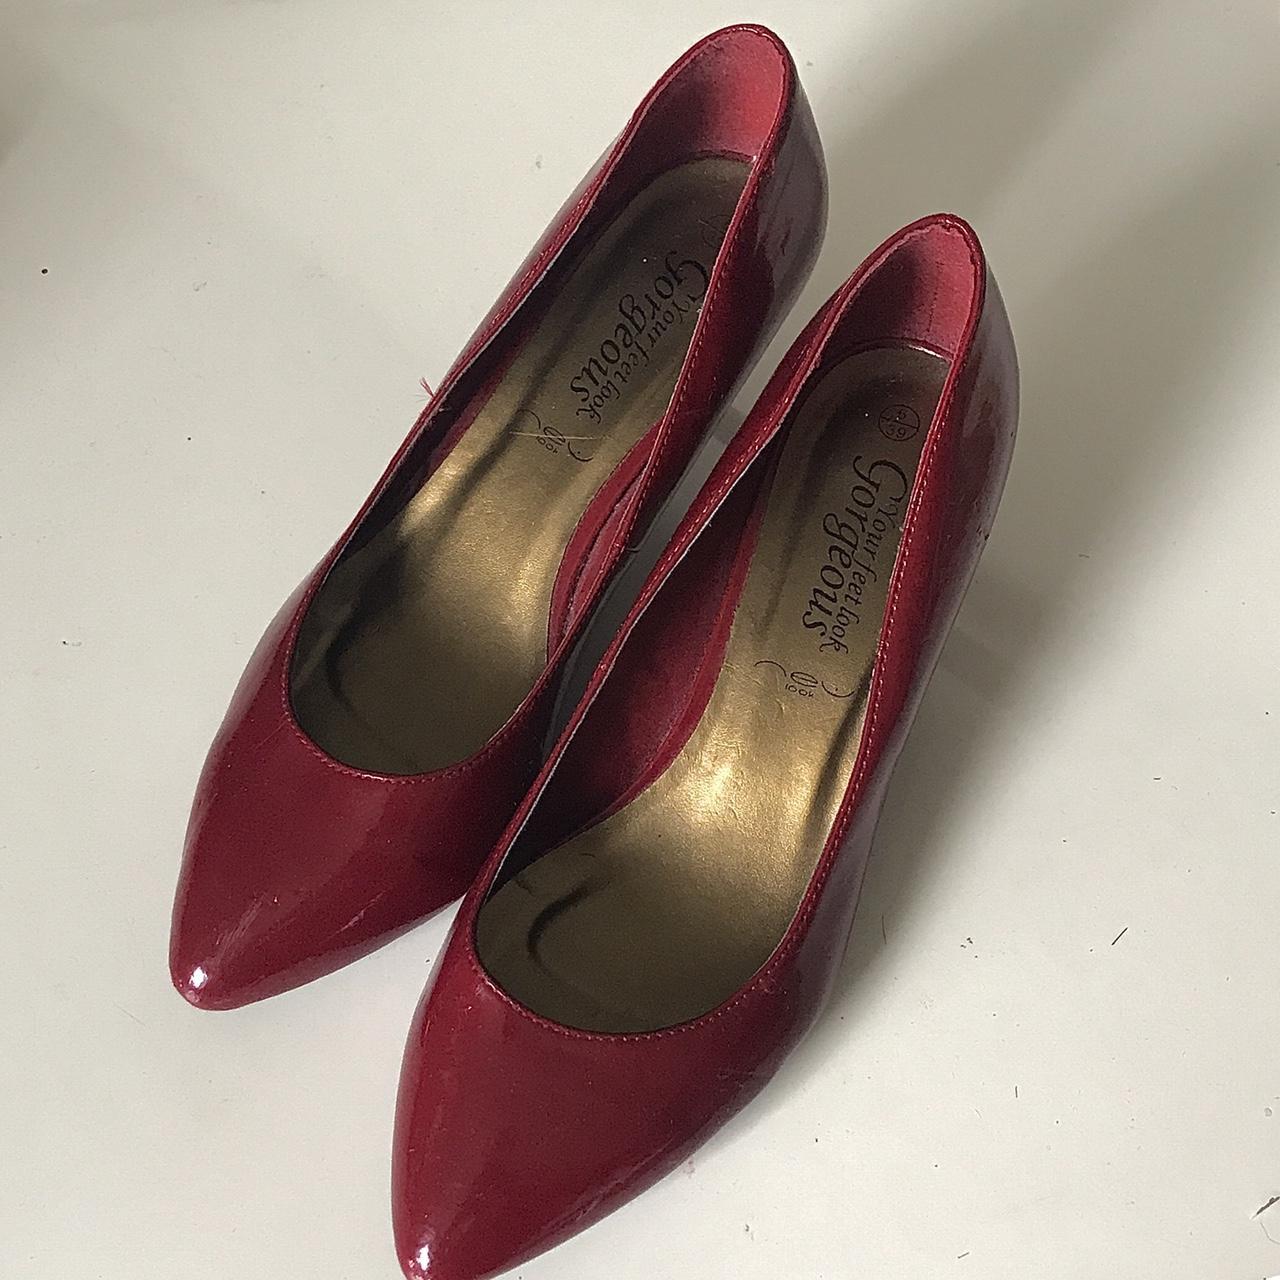 Vintage Red New Look Heels these shoes have been... - Depop